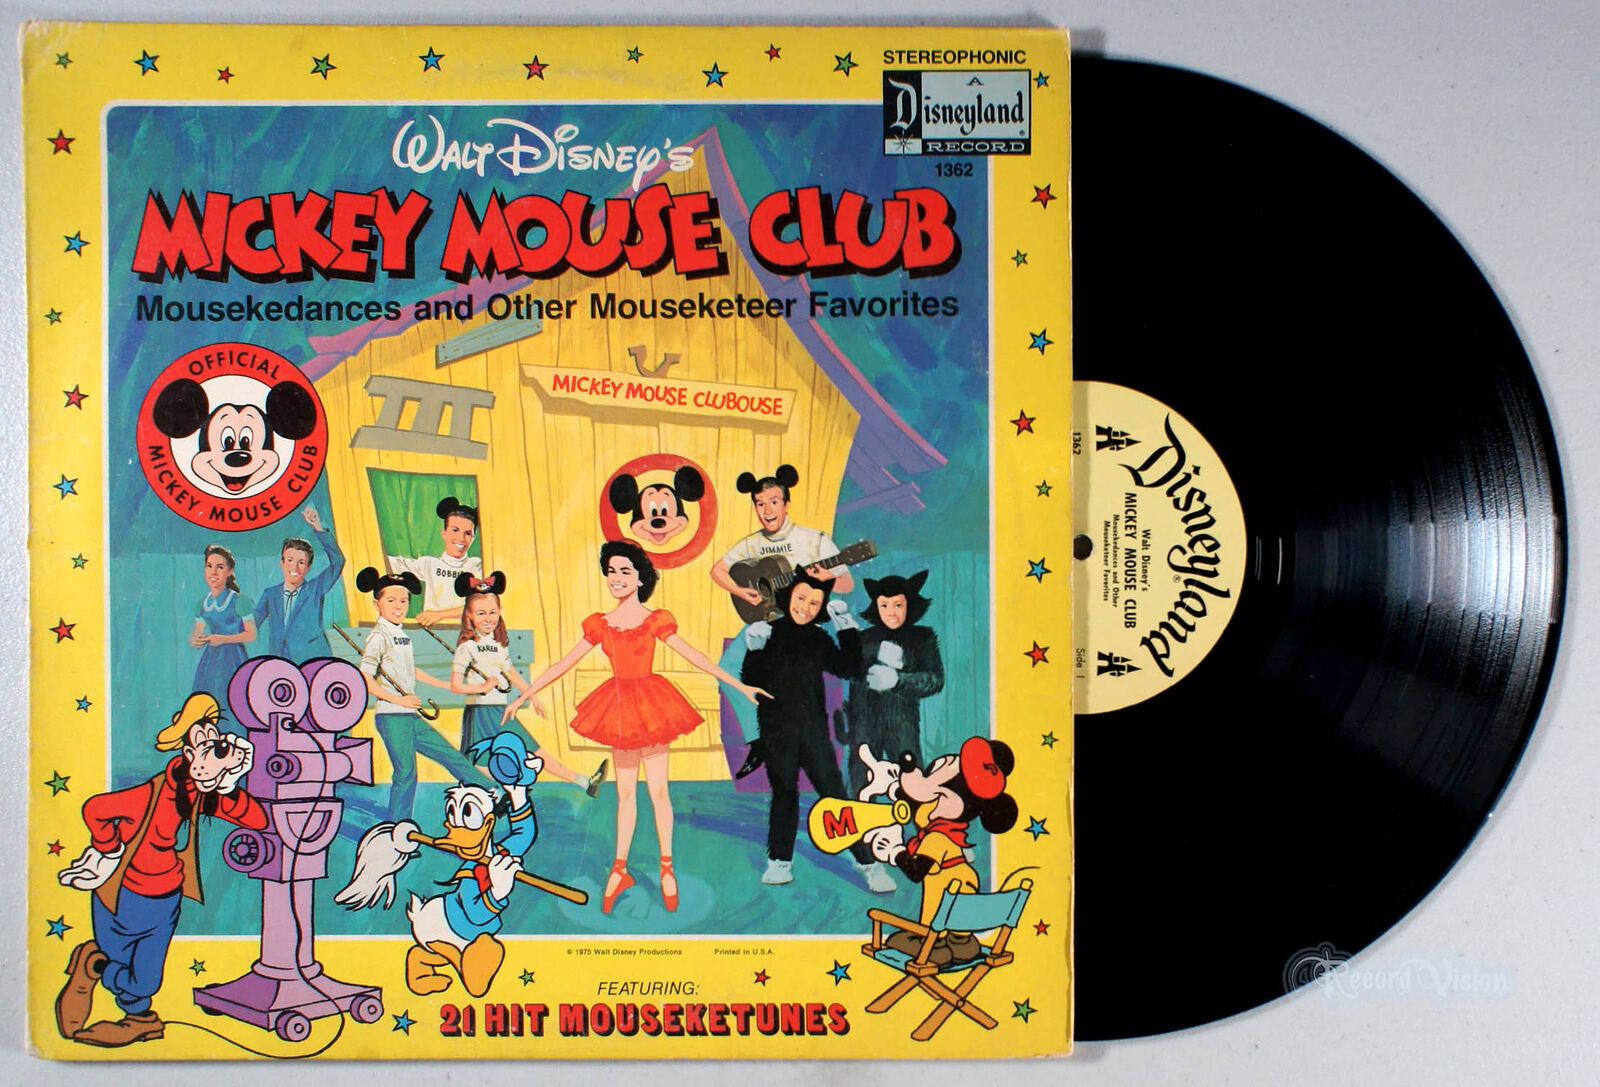 Disney - Mickey Mouse Club (1974) Vinyl LP • Annette Funicello, March